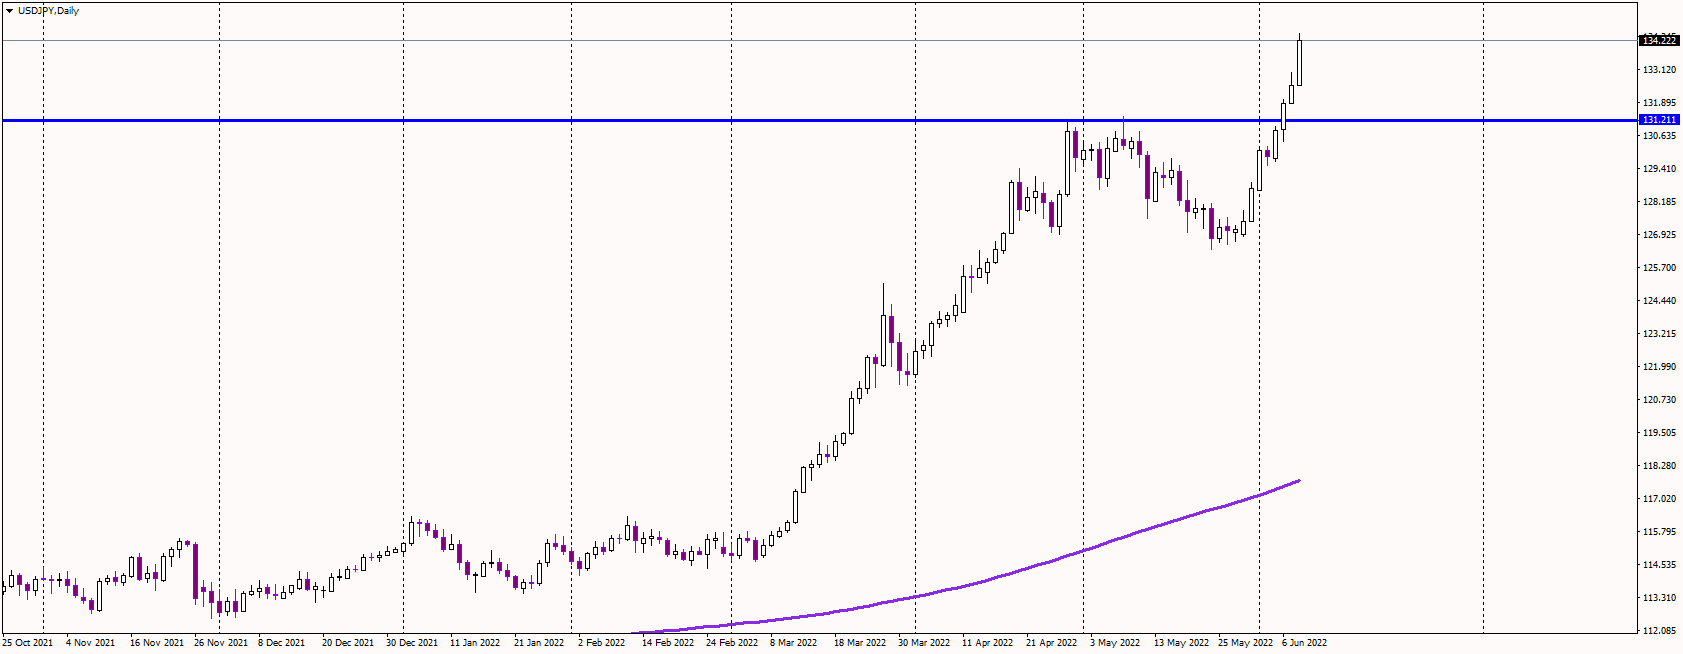 USDJPY Jumps 1%, Touches 2002 Highs